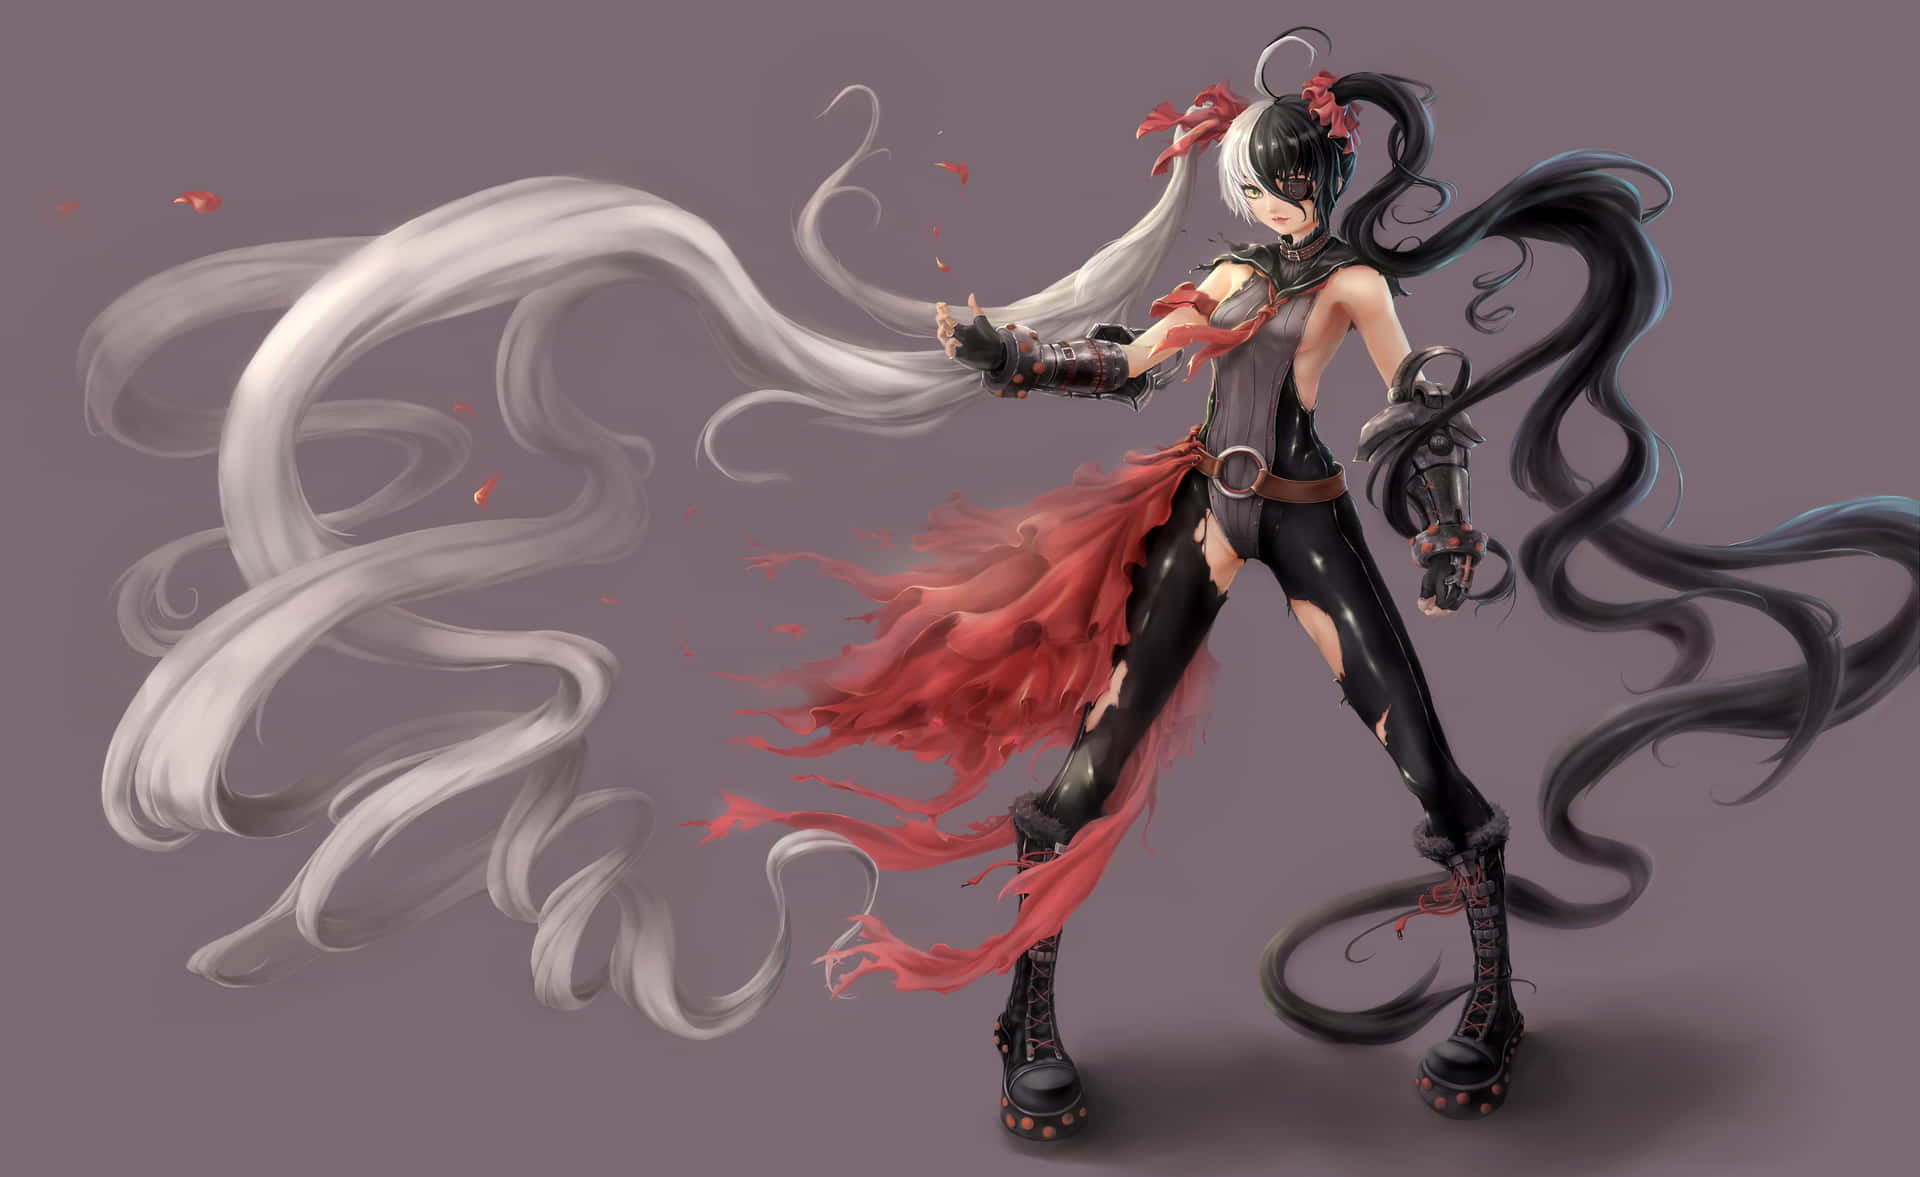 Intense Battle in Blade and Soul Wallpaper